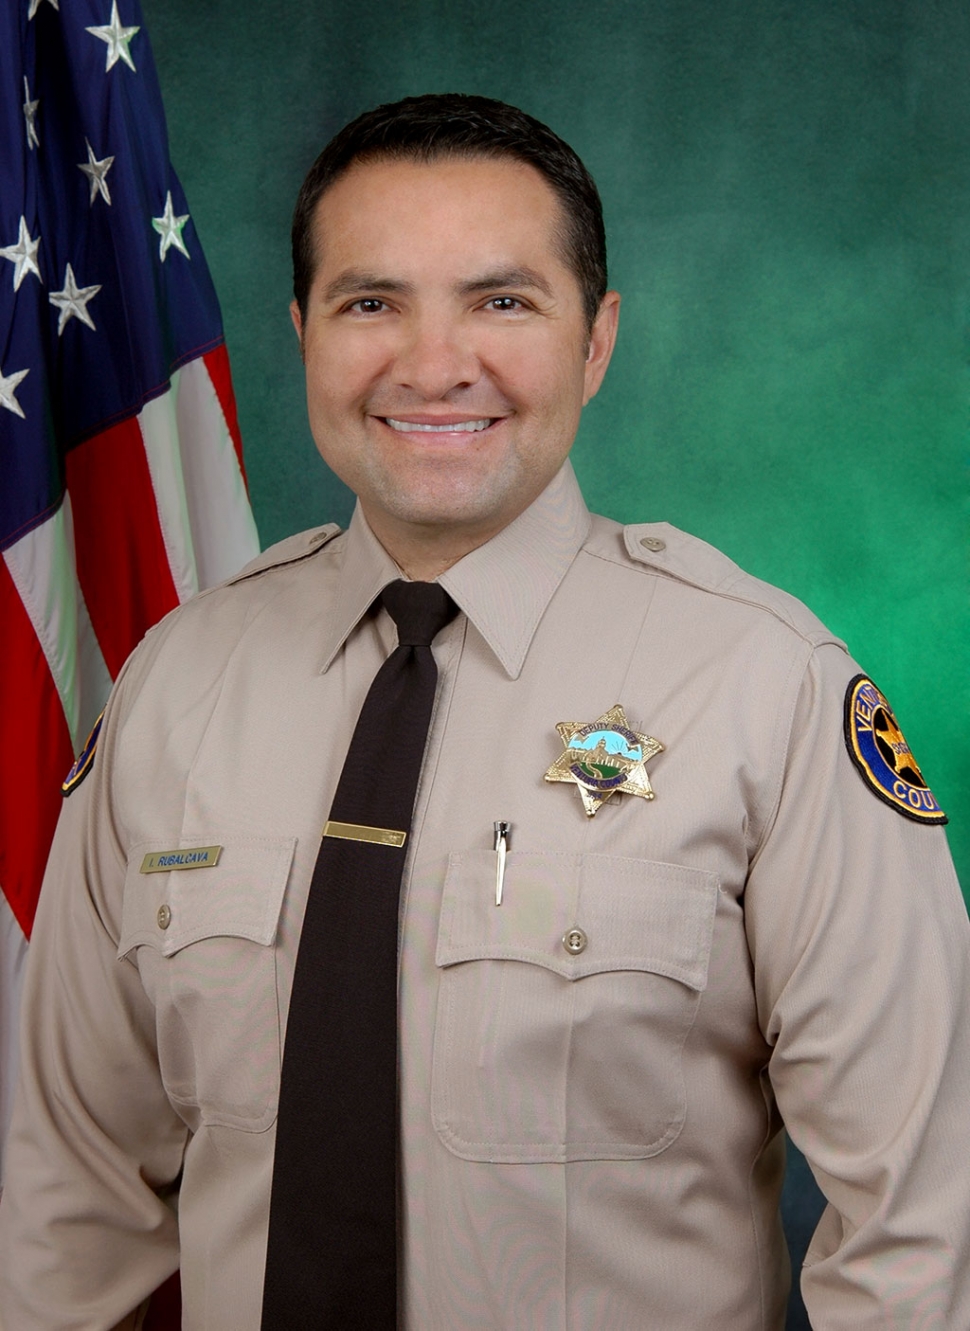 Fillmore Deputy Ismael Rubalcavo (VCSO-Fillmore PD) was nominated for “CIT Officer of the Year”. Although Officer Rubalcavo did not win, Fillmore can be proud of his nomination. The Crisis Intervention Team award, given out on September 26th at the Camarillo Library, went to Officer James Espinoza of the Ventura Police Department. Congratulations to both men.